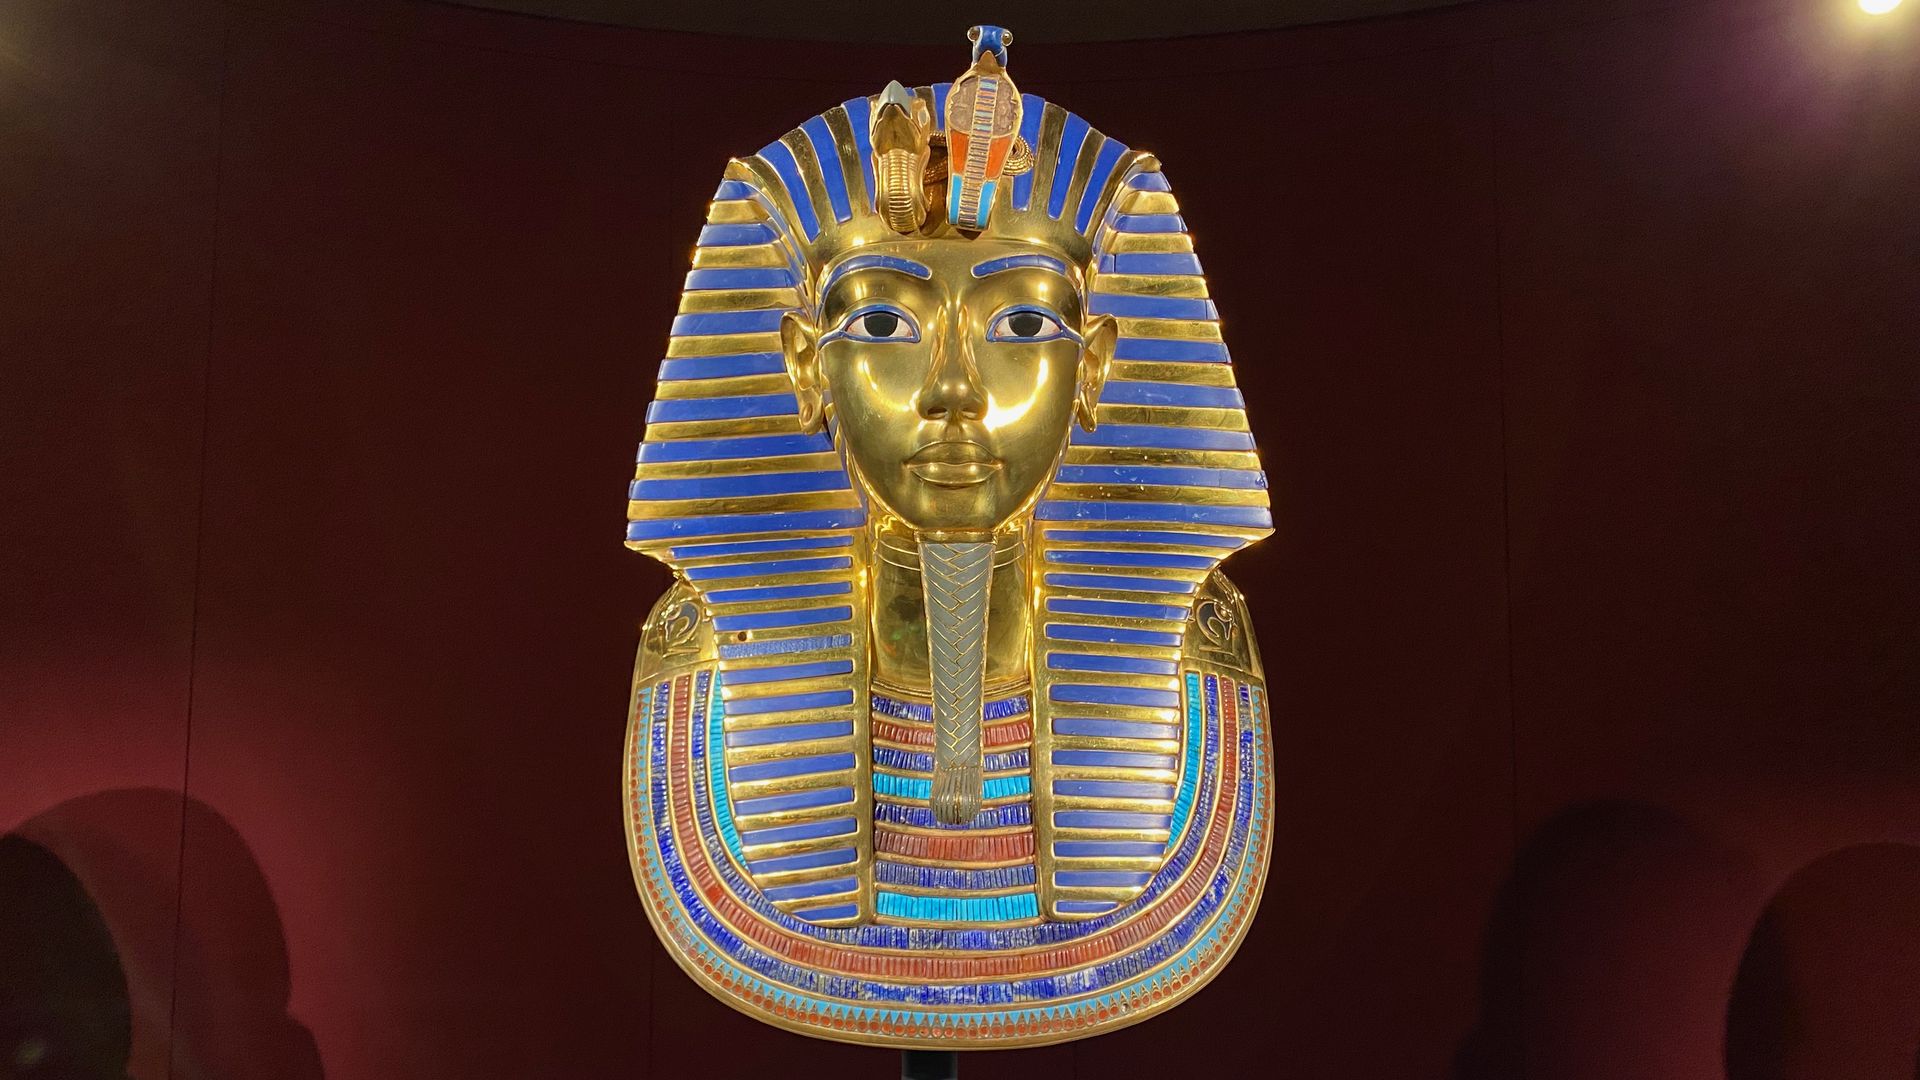 King Tut's mask, in solid gold, on display